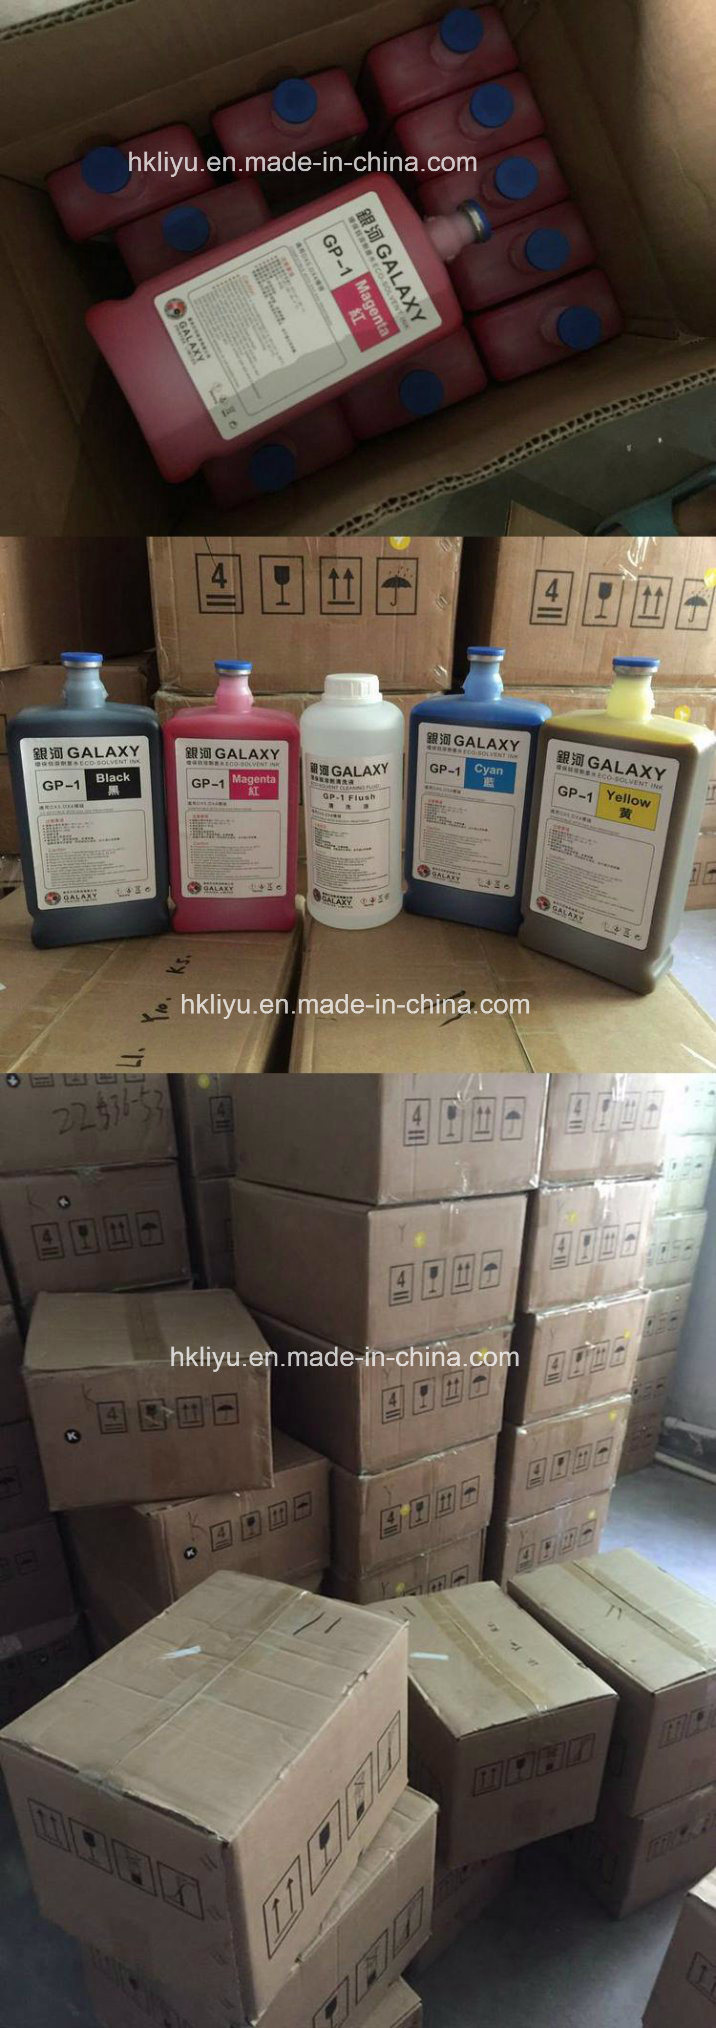 Wholesale/Factory Price Phaeton/Galaxy Gp-1 Eco Solvent Ink for Galaxy Phaeton Roland Printer with No Smell Gp-1 Ink for Epson Dx5